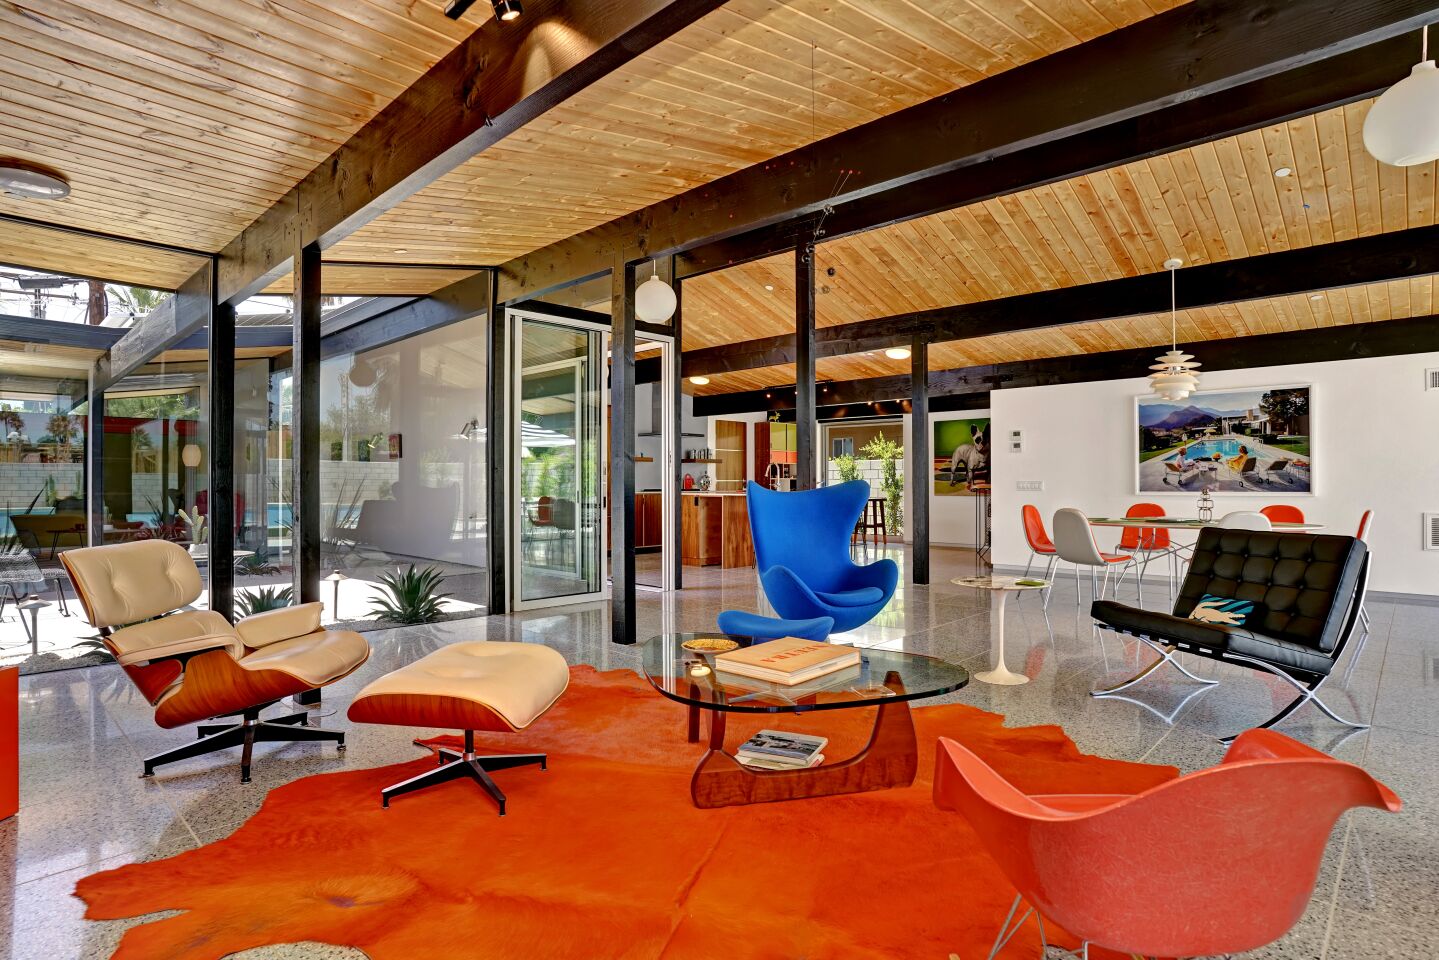 This Joseph Eichler-inspired floor plan has four bedrooms and 2.5 bathrooms in 2,123 square feet.